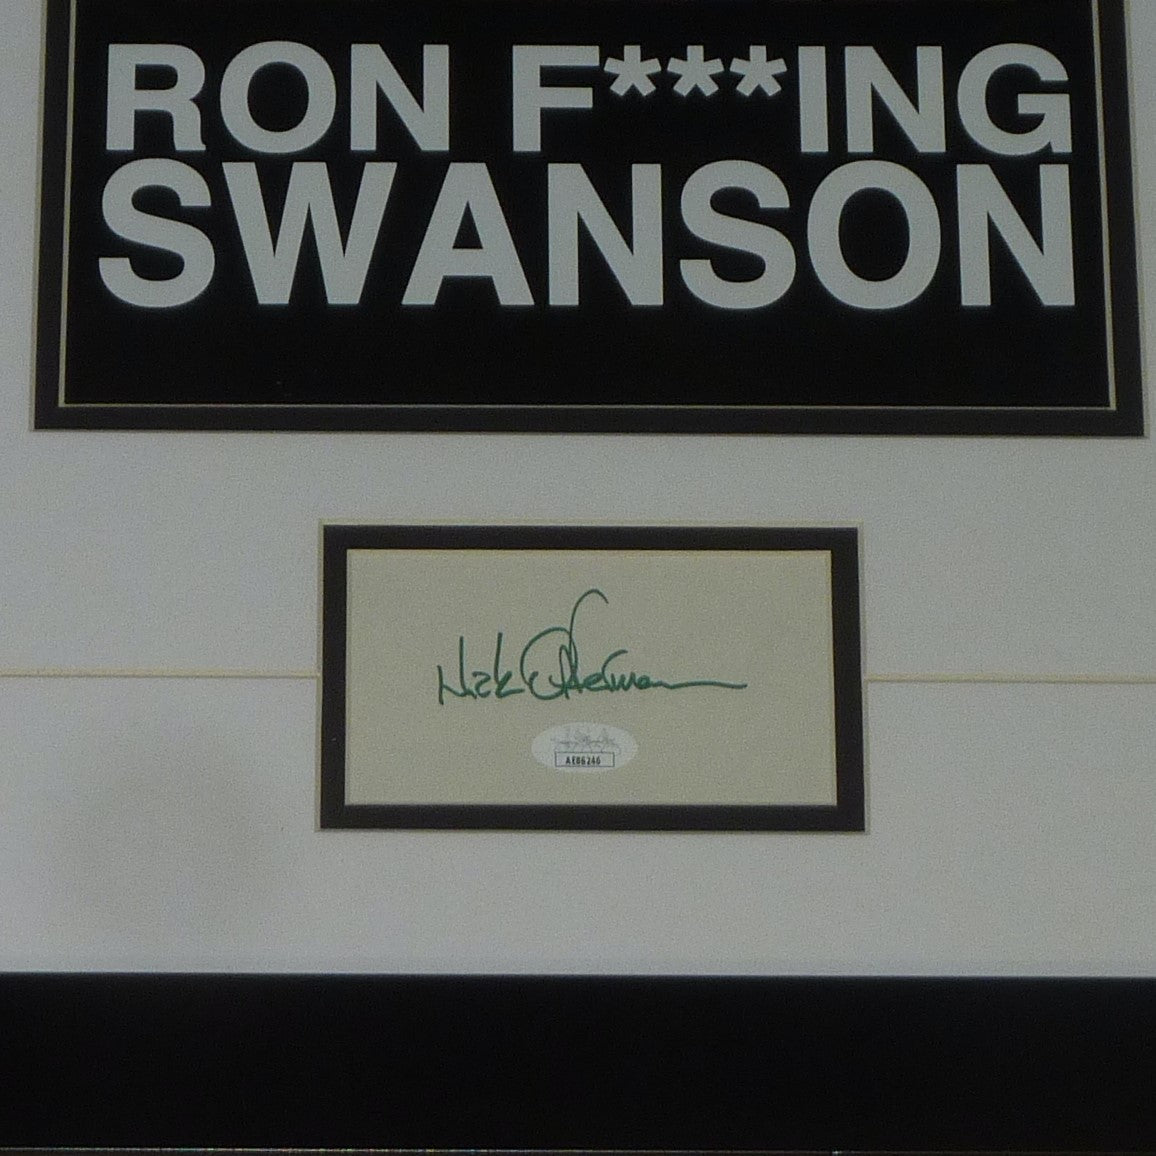 Nick Offerman Autographed Parks and Recreation Ron Swanson Deluxe Framed Piece - JSA